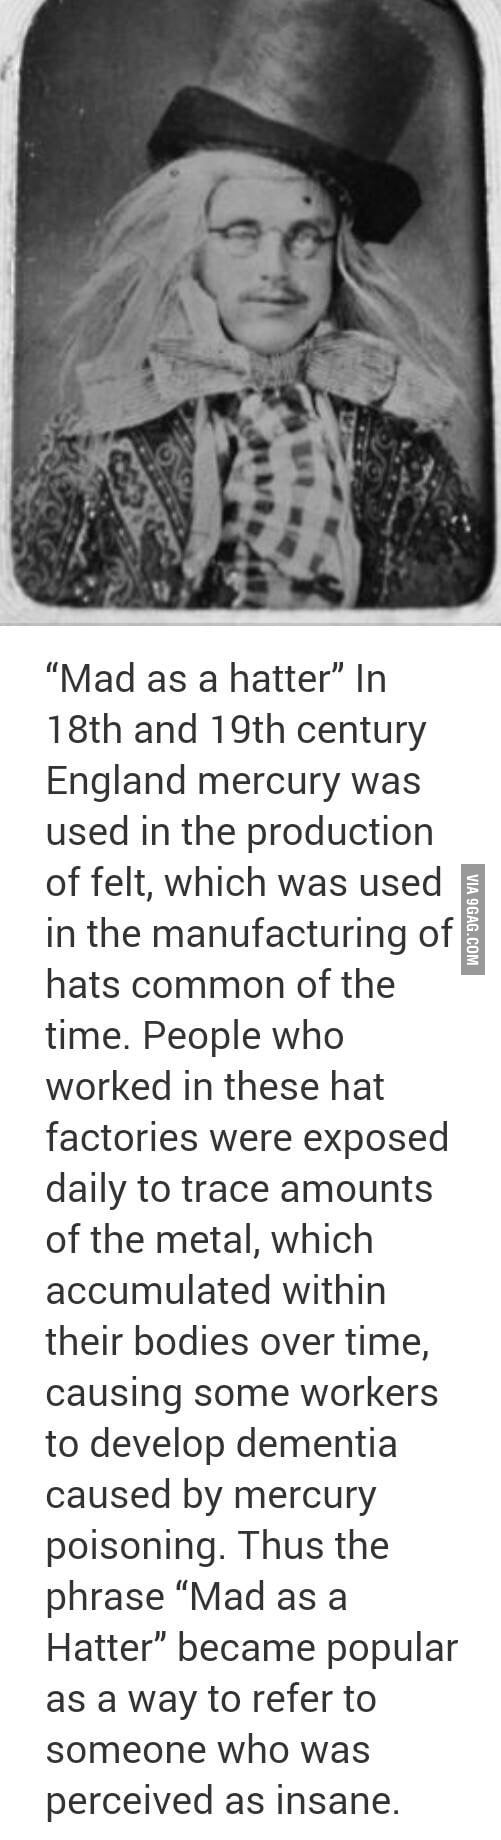 mad as a hatter origin